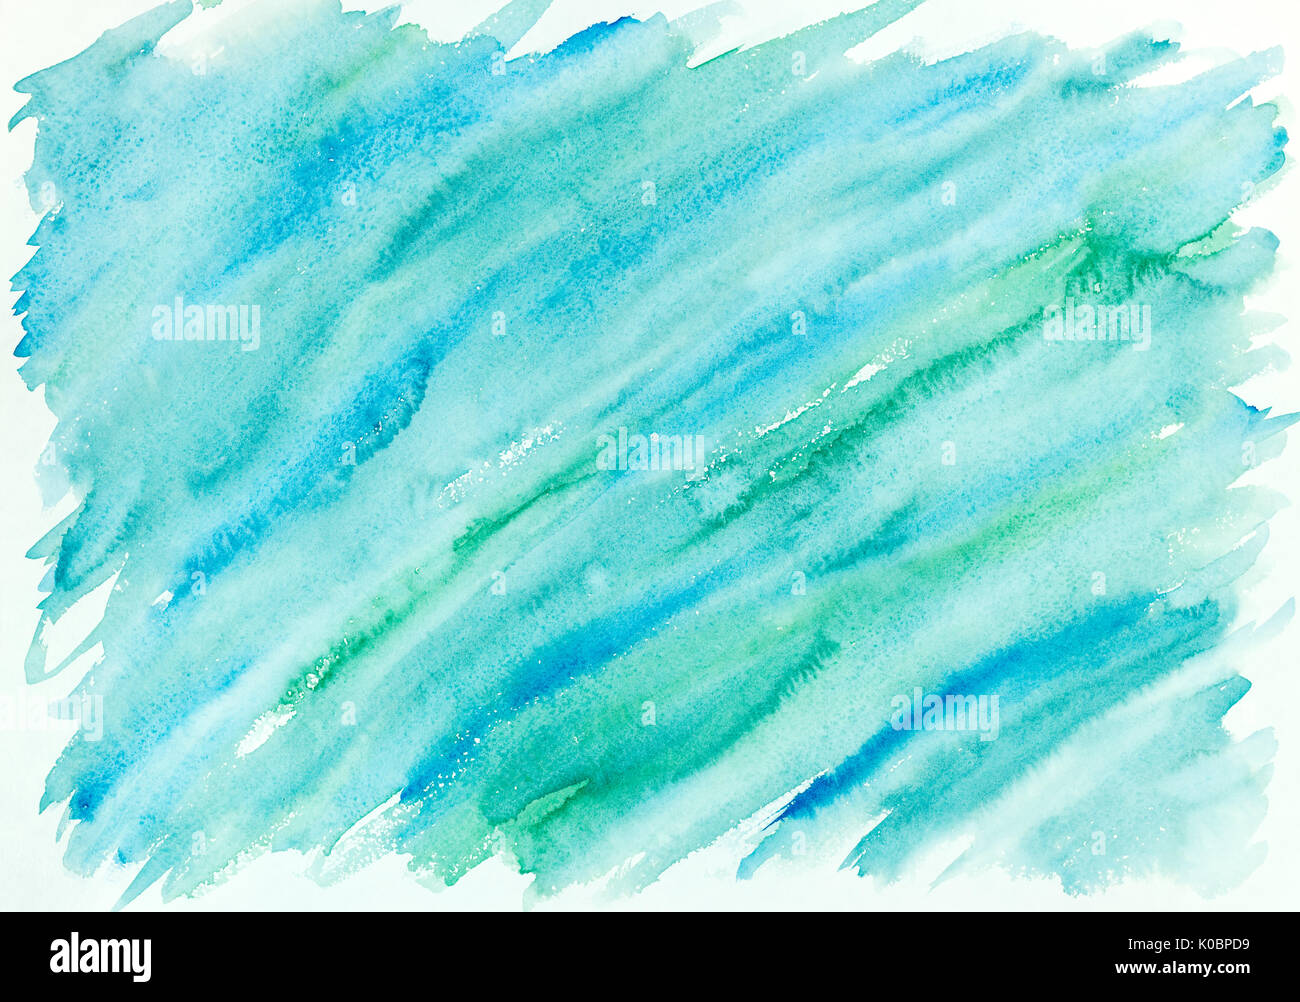 hand painted abstract watercolor wash background in blue and green Stock Photo